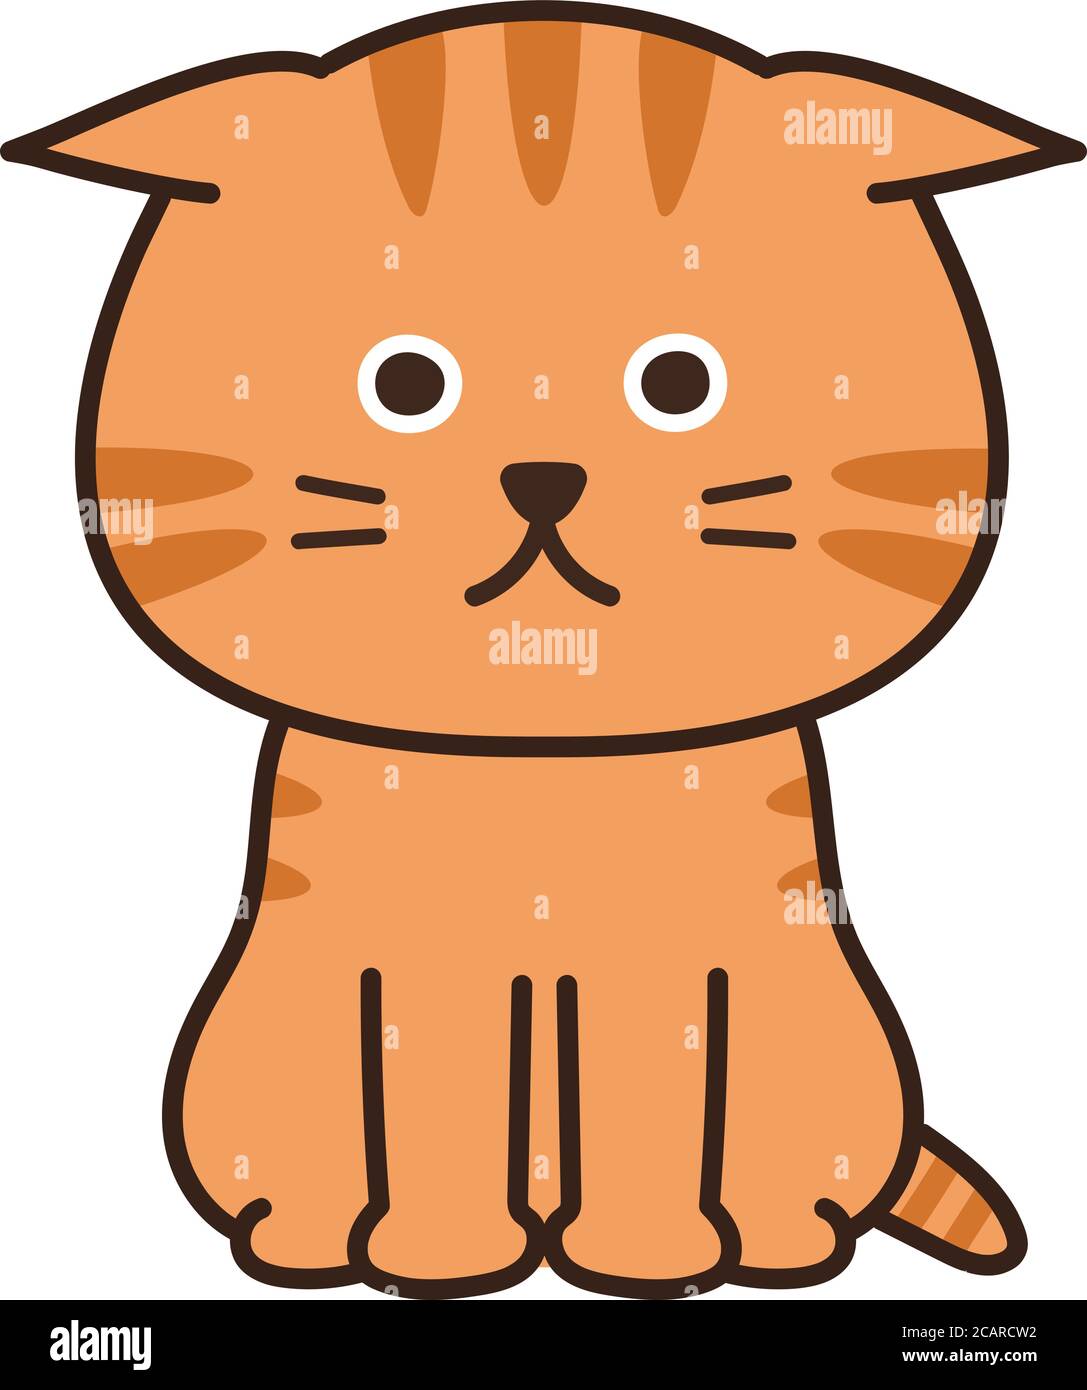 Airplane ears cat in trouble. Isolated on white background. Stock Vector